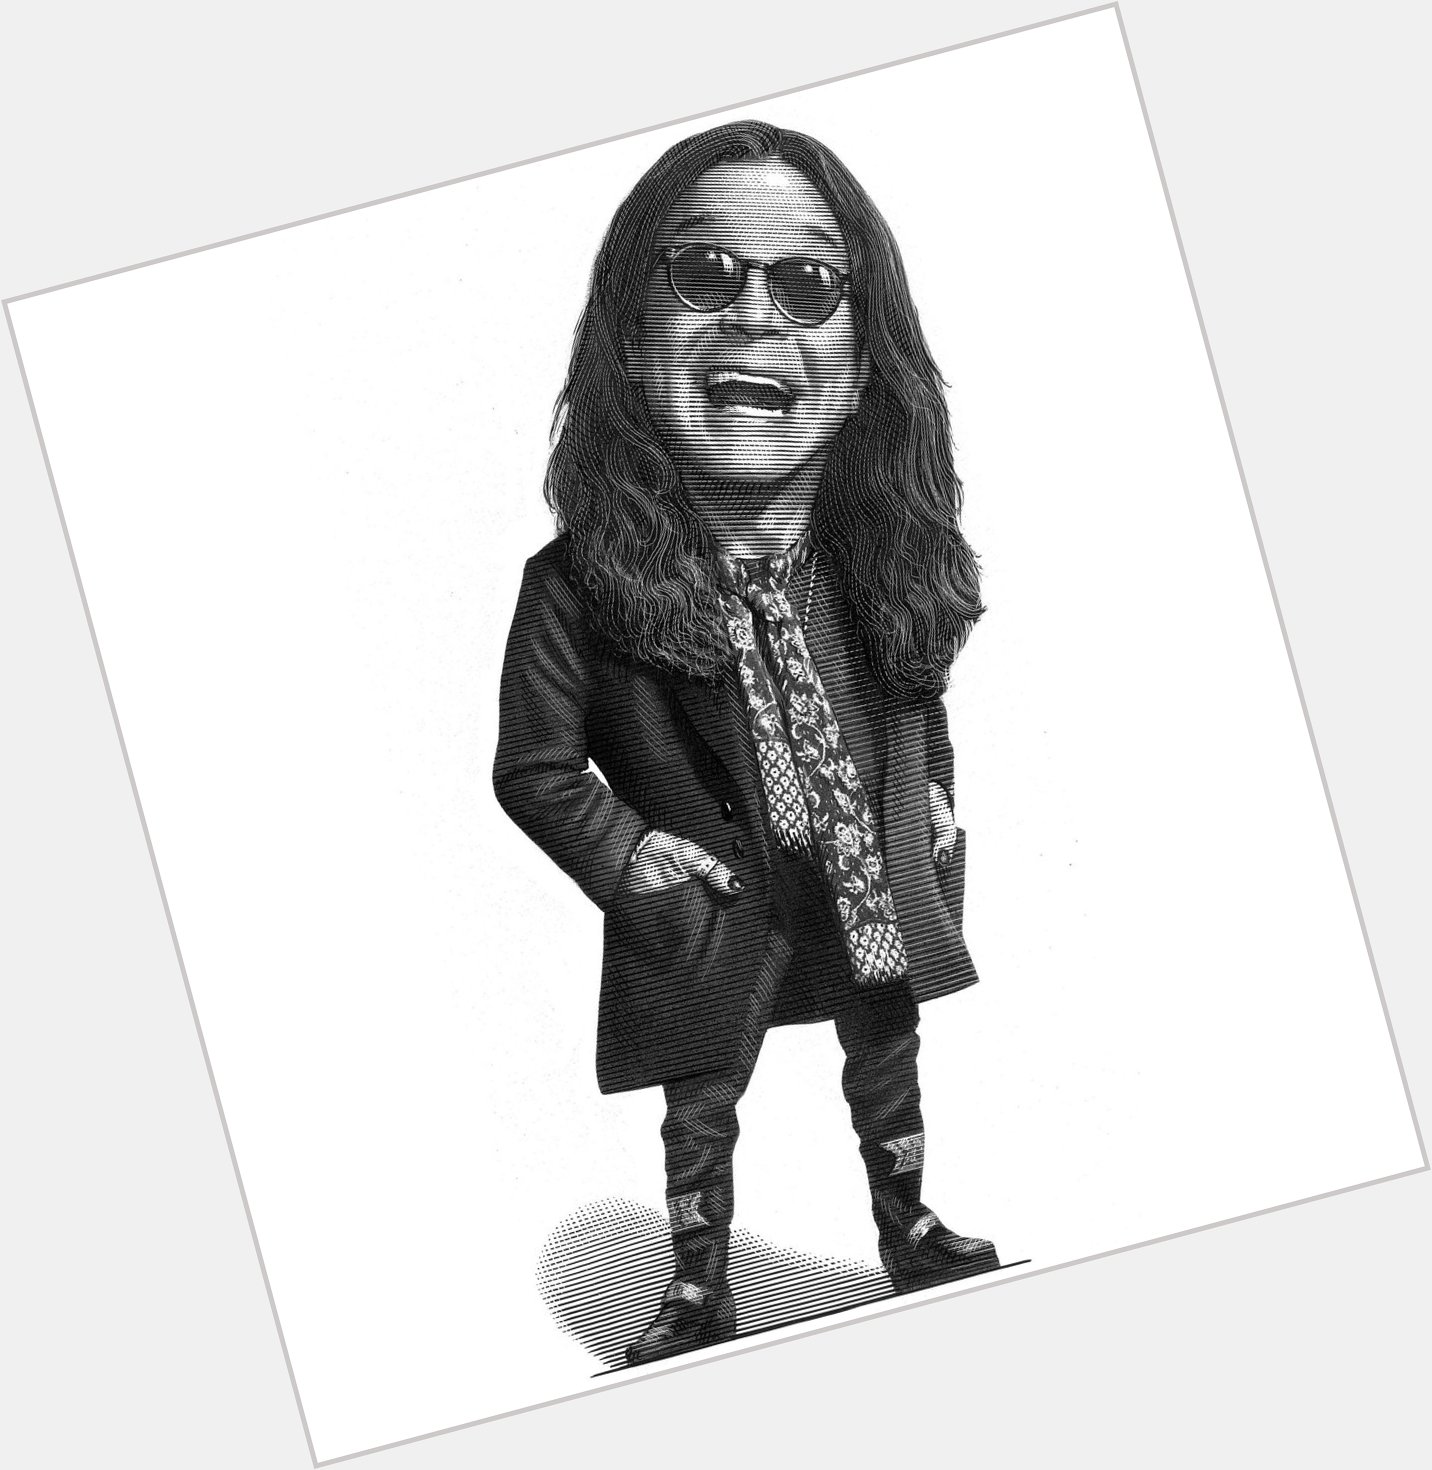 Happy 72nd birthday to Ozzy Osbourne.
Well, who would have thought it ?      